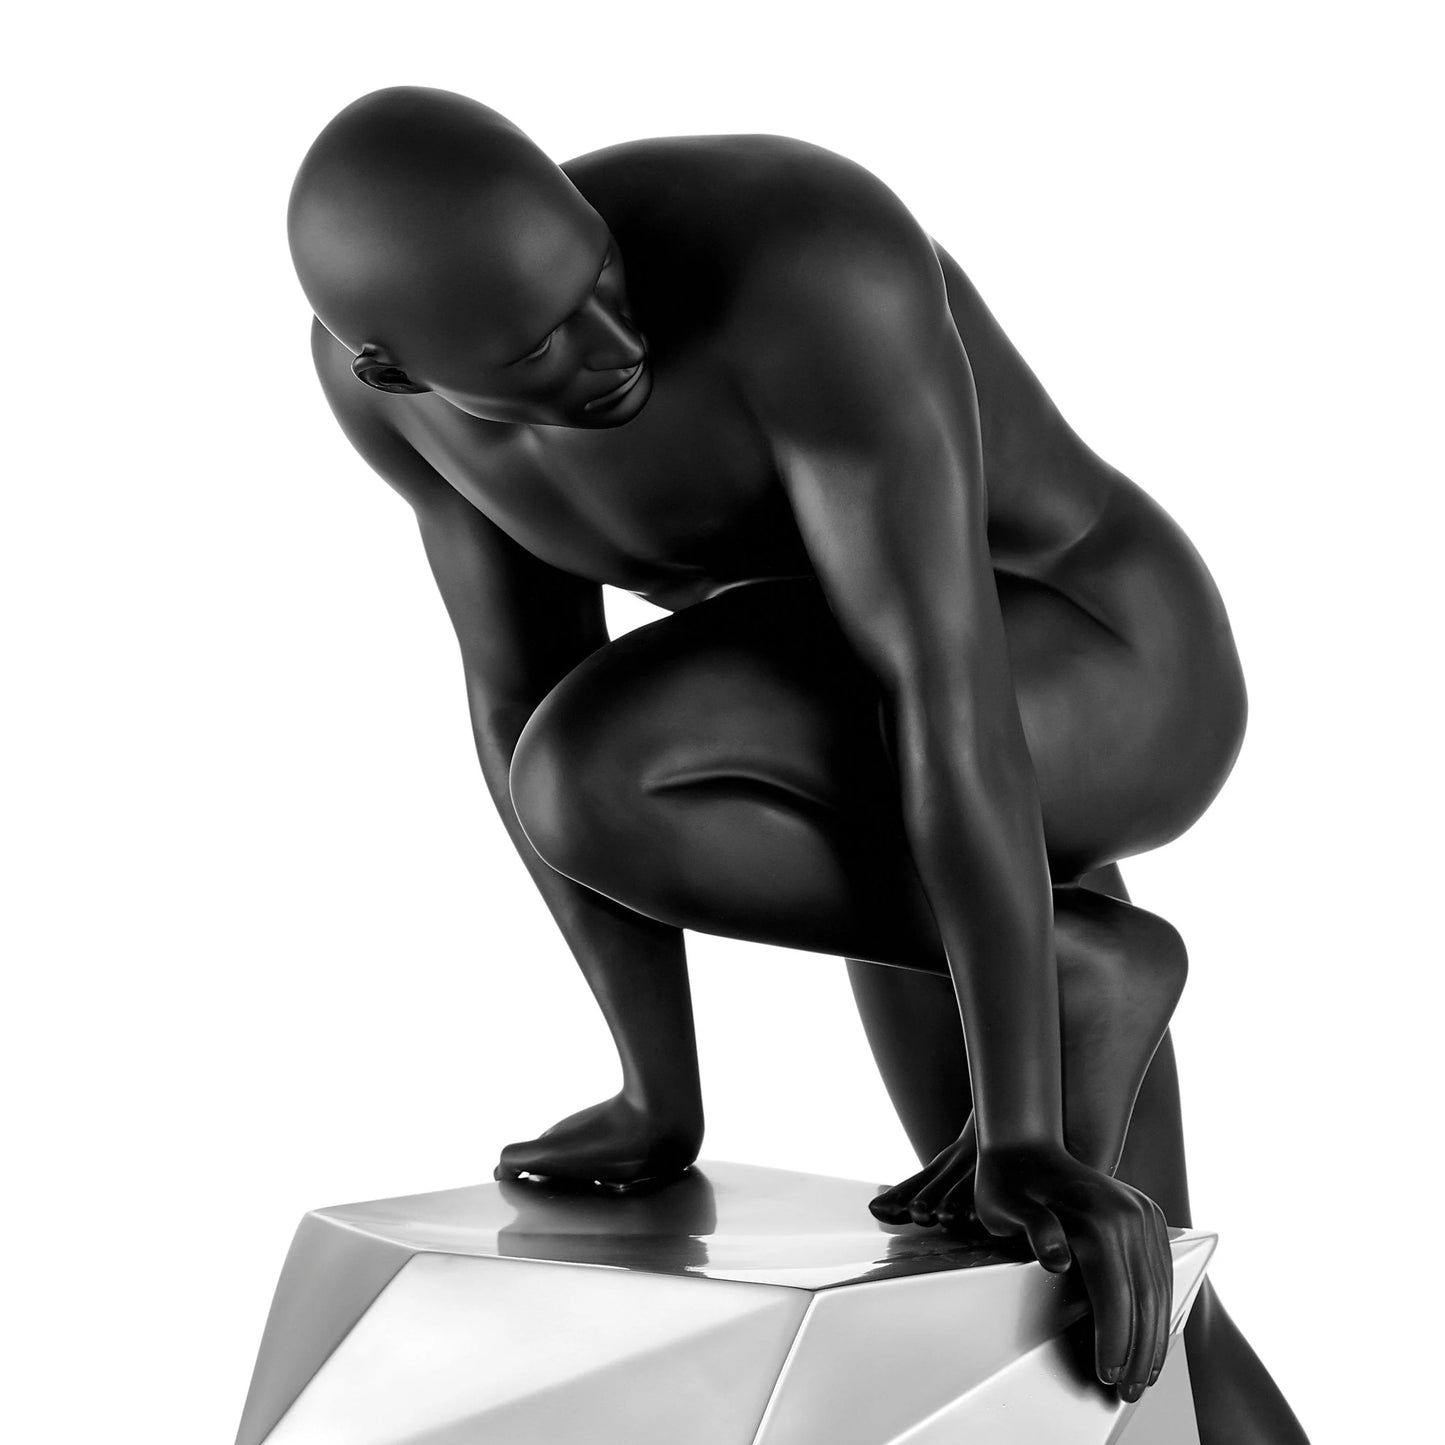 Sensuality Man Sculpture in Matte Black and Chrome 5